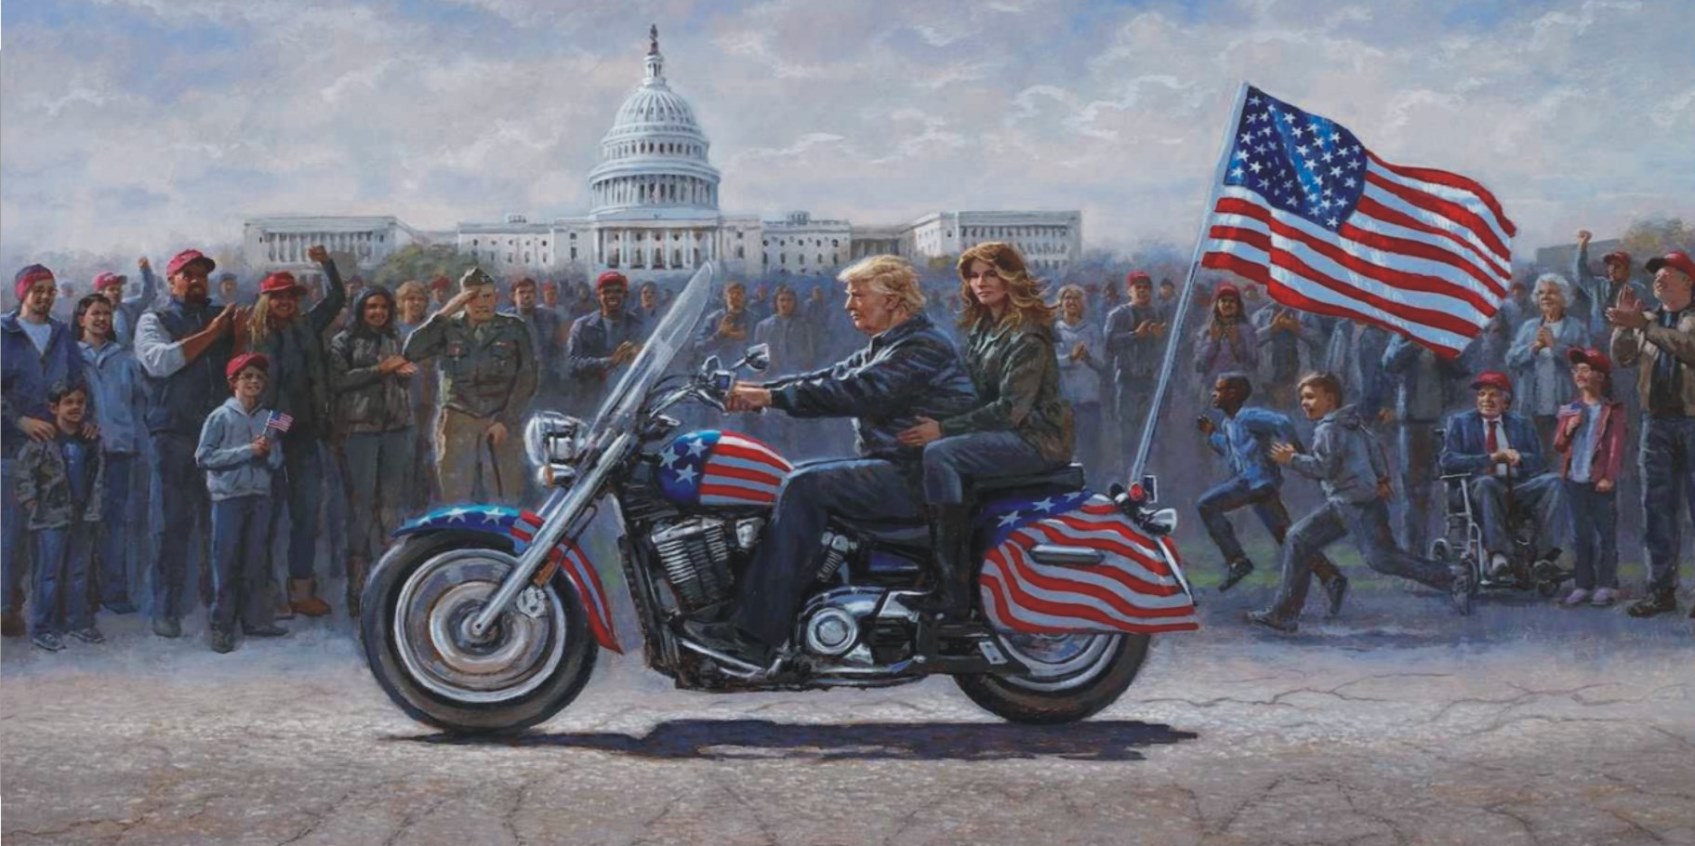 Trump On Motorcycle Photo LICENSE PLATE